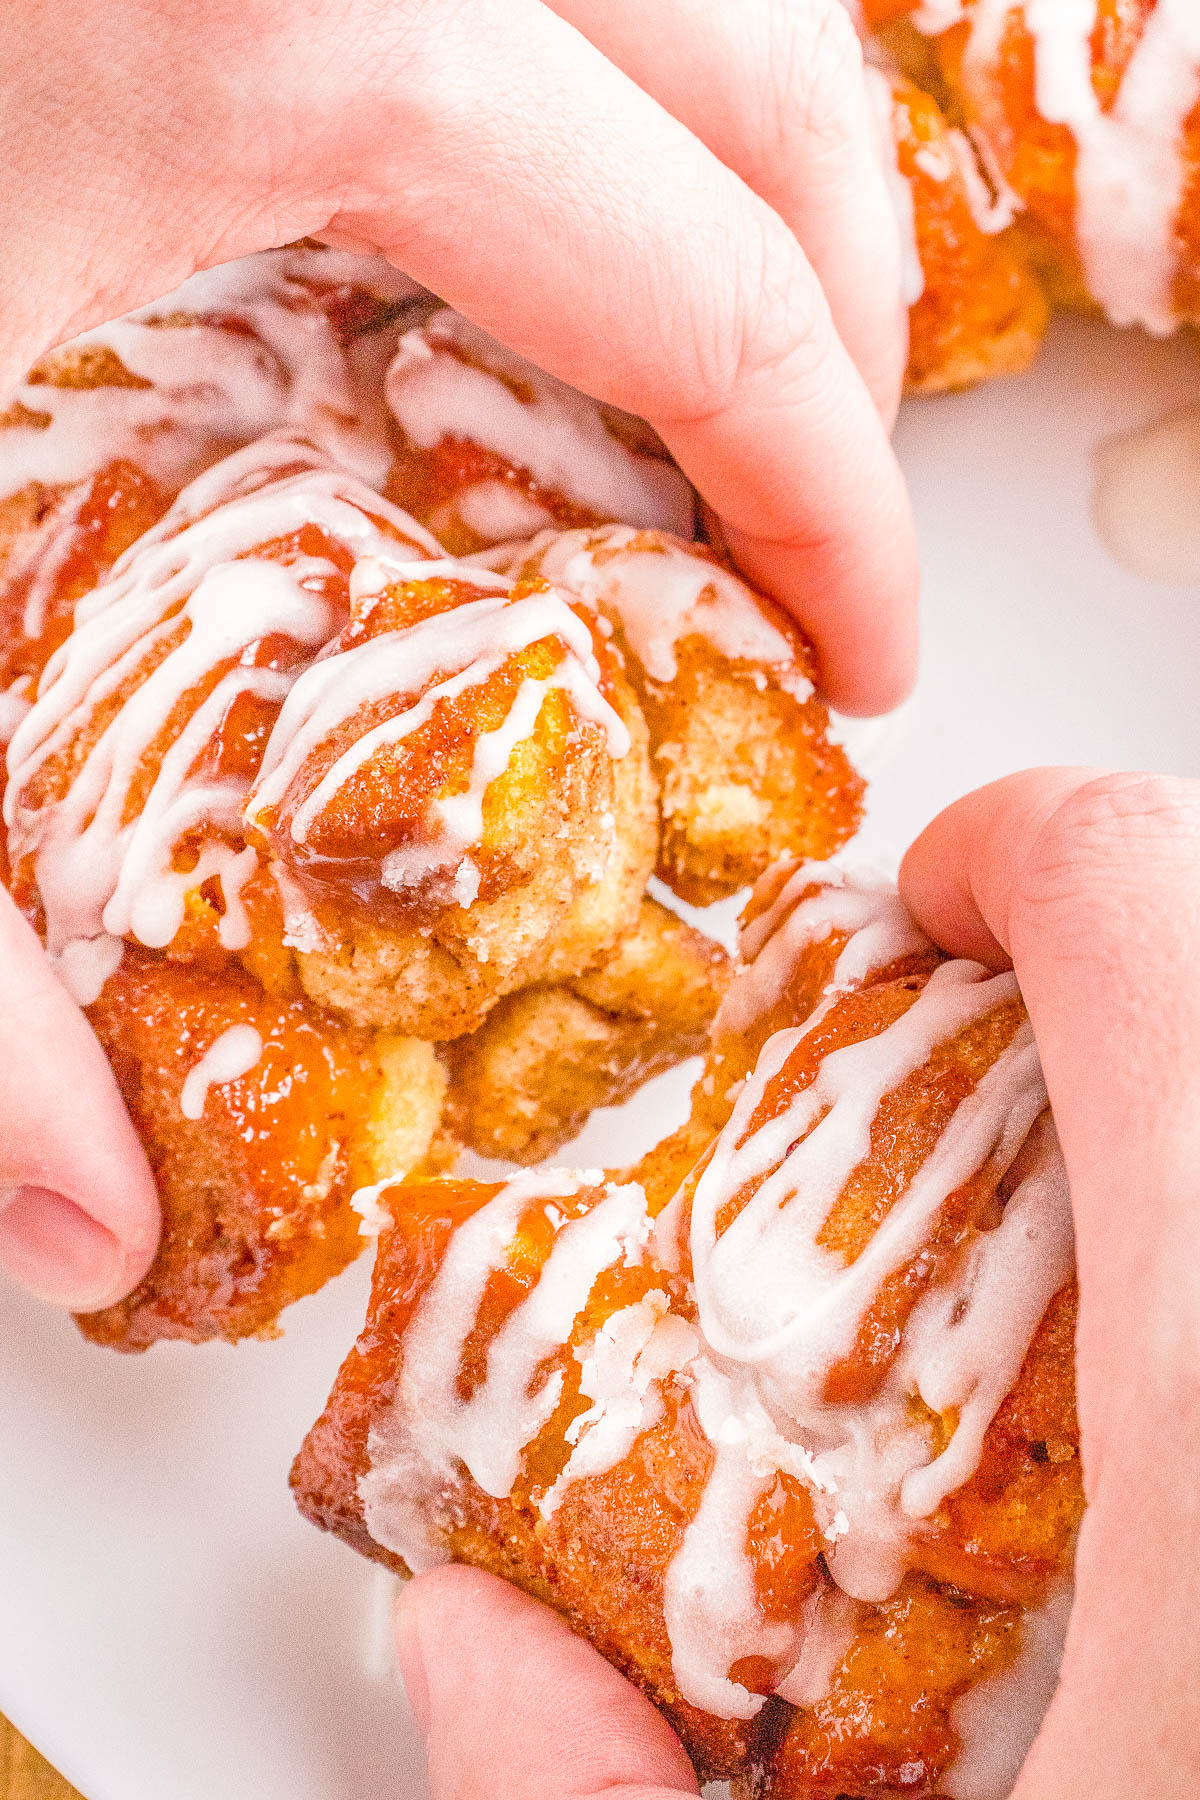 Hands holding a freshly baked cinnamon roll monkey bread covered in white icing, with more rolls visible in the background.